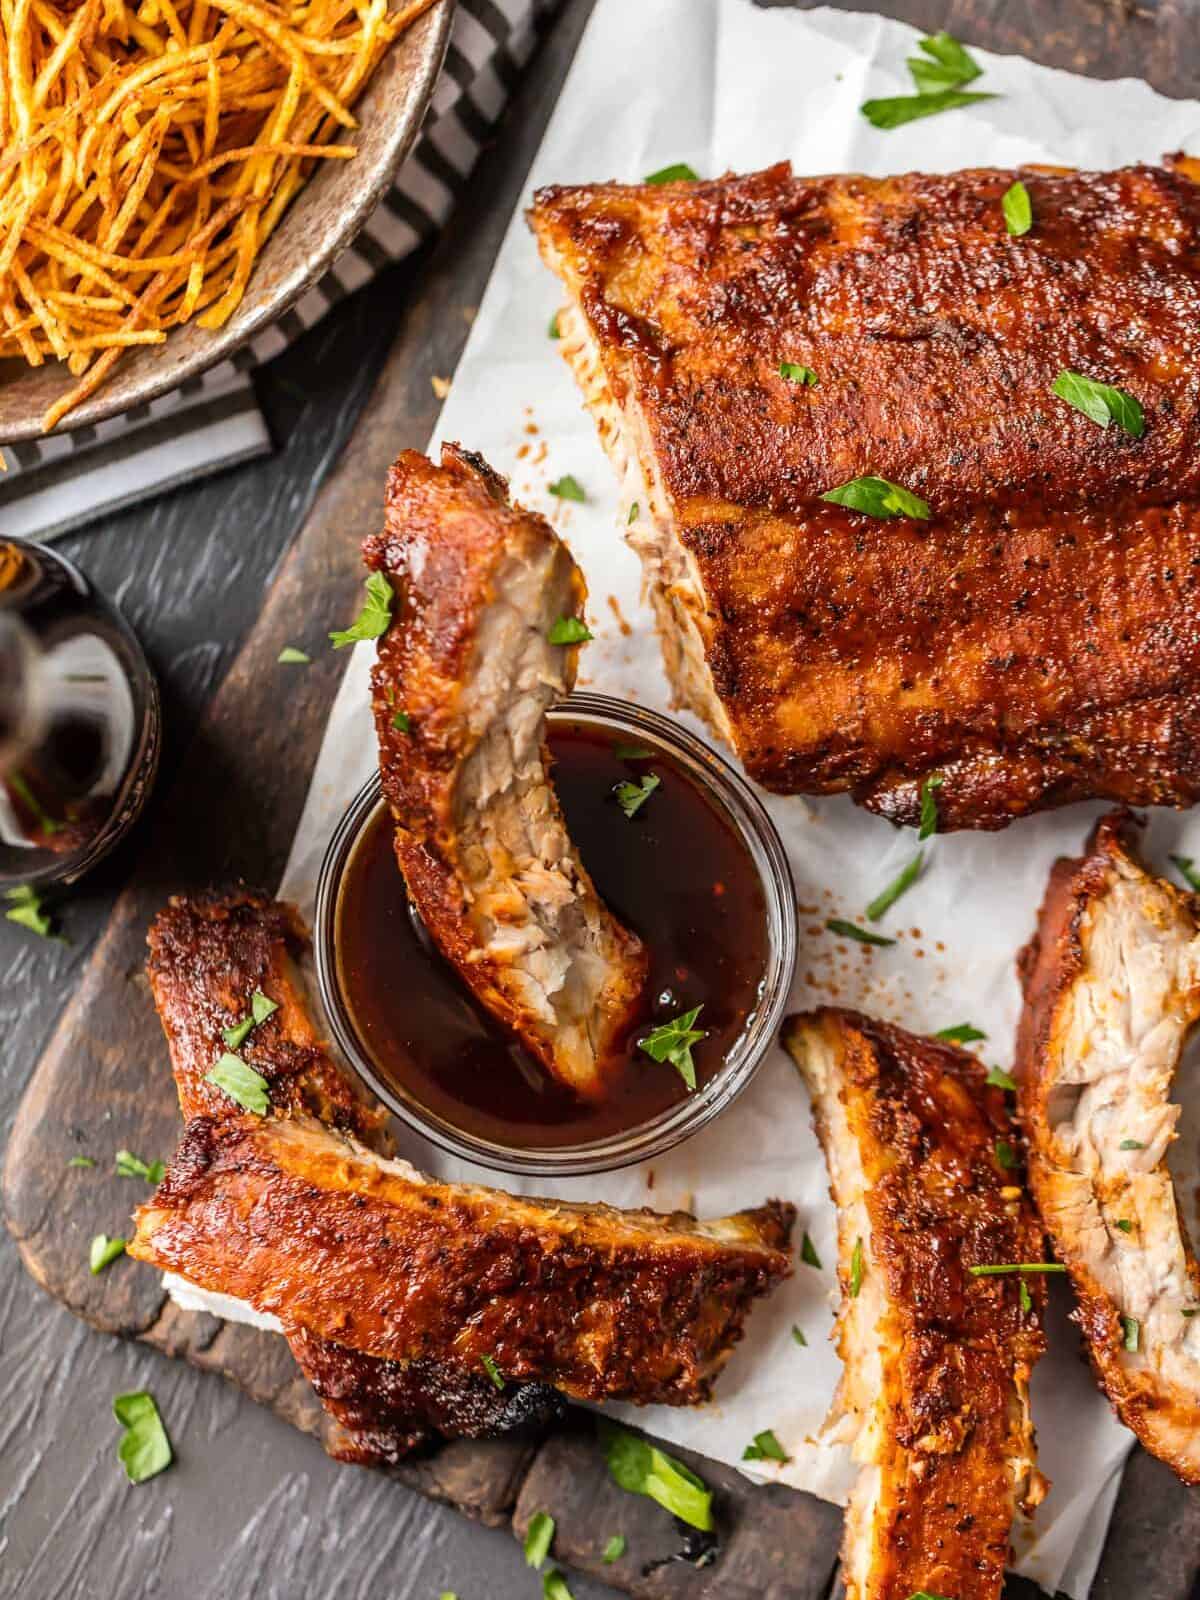 Easy Oven baked ribs, one rib dipped in bbq sauce